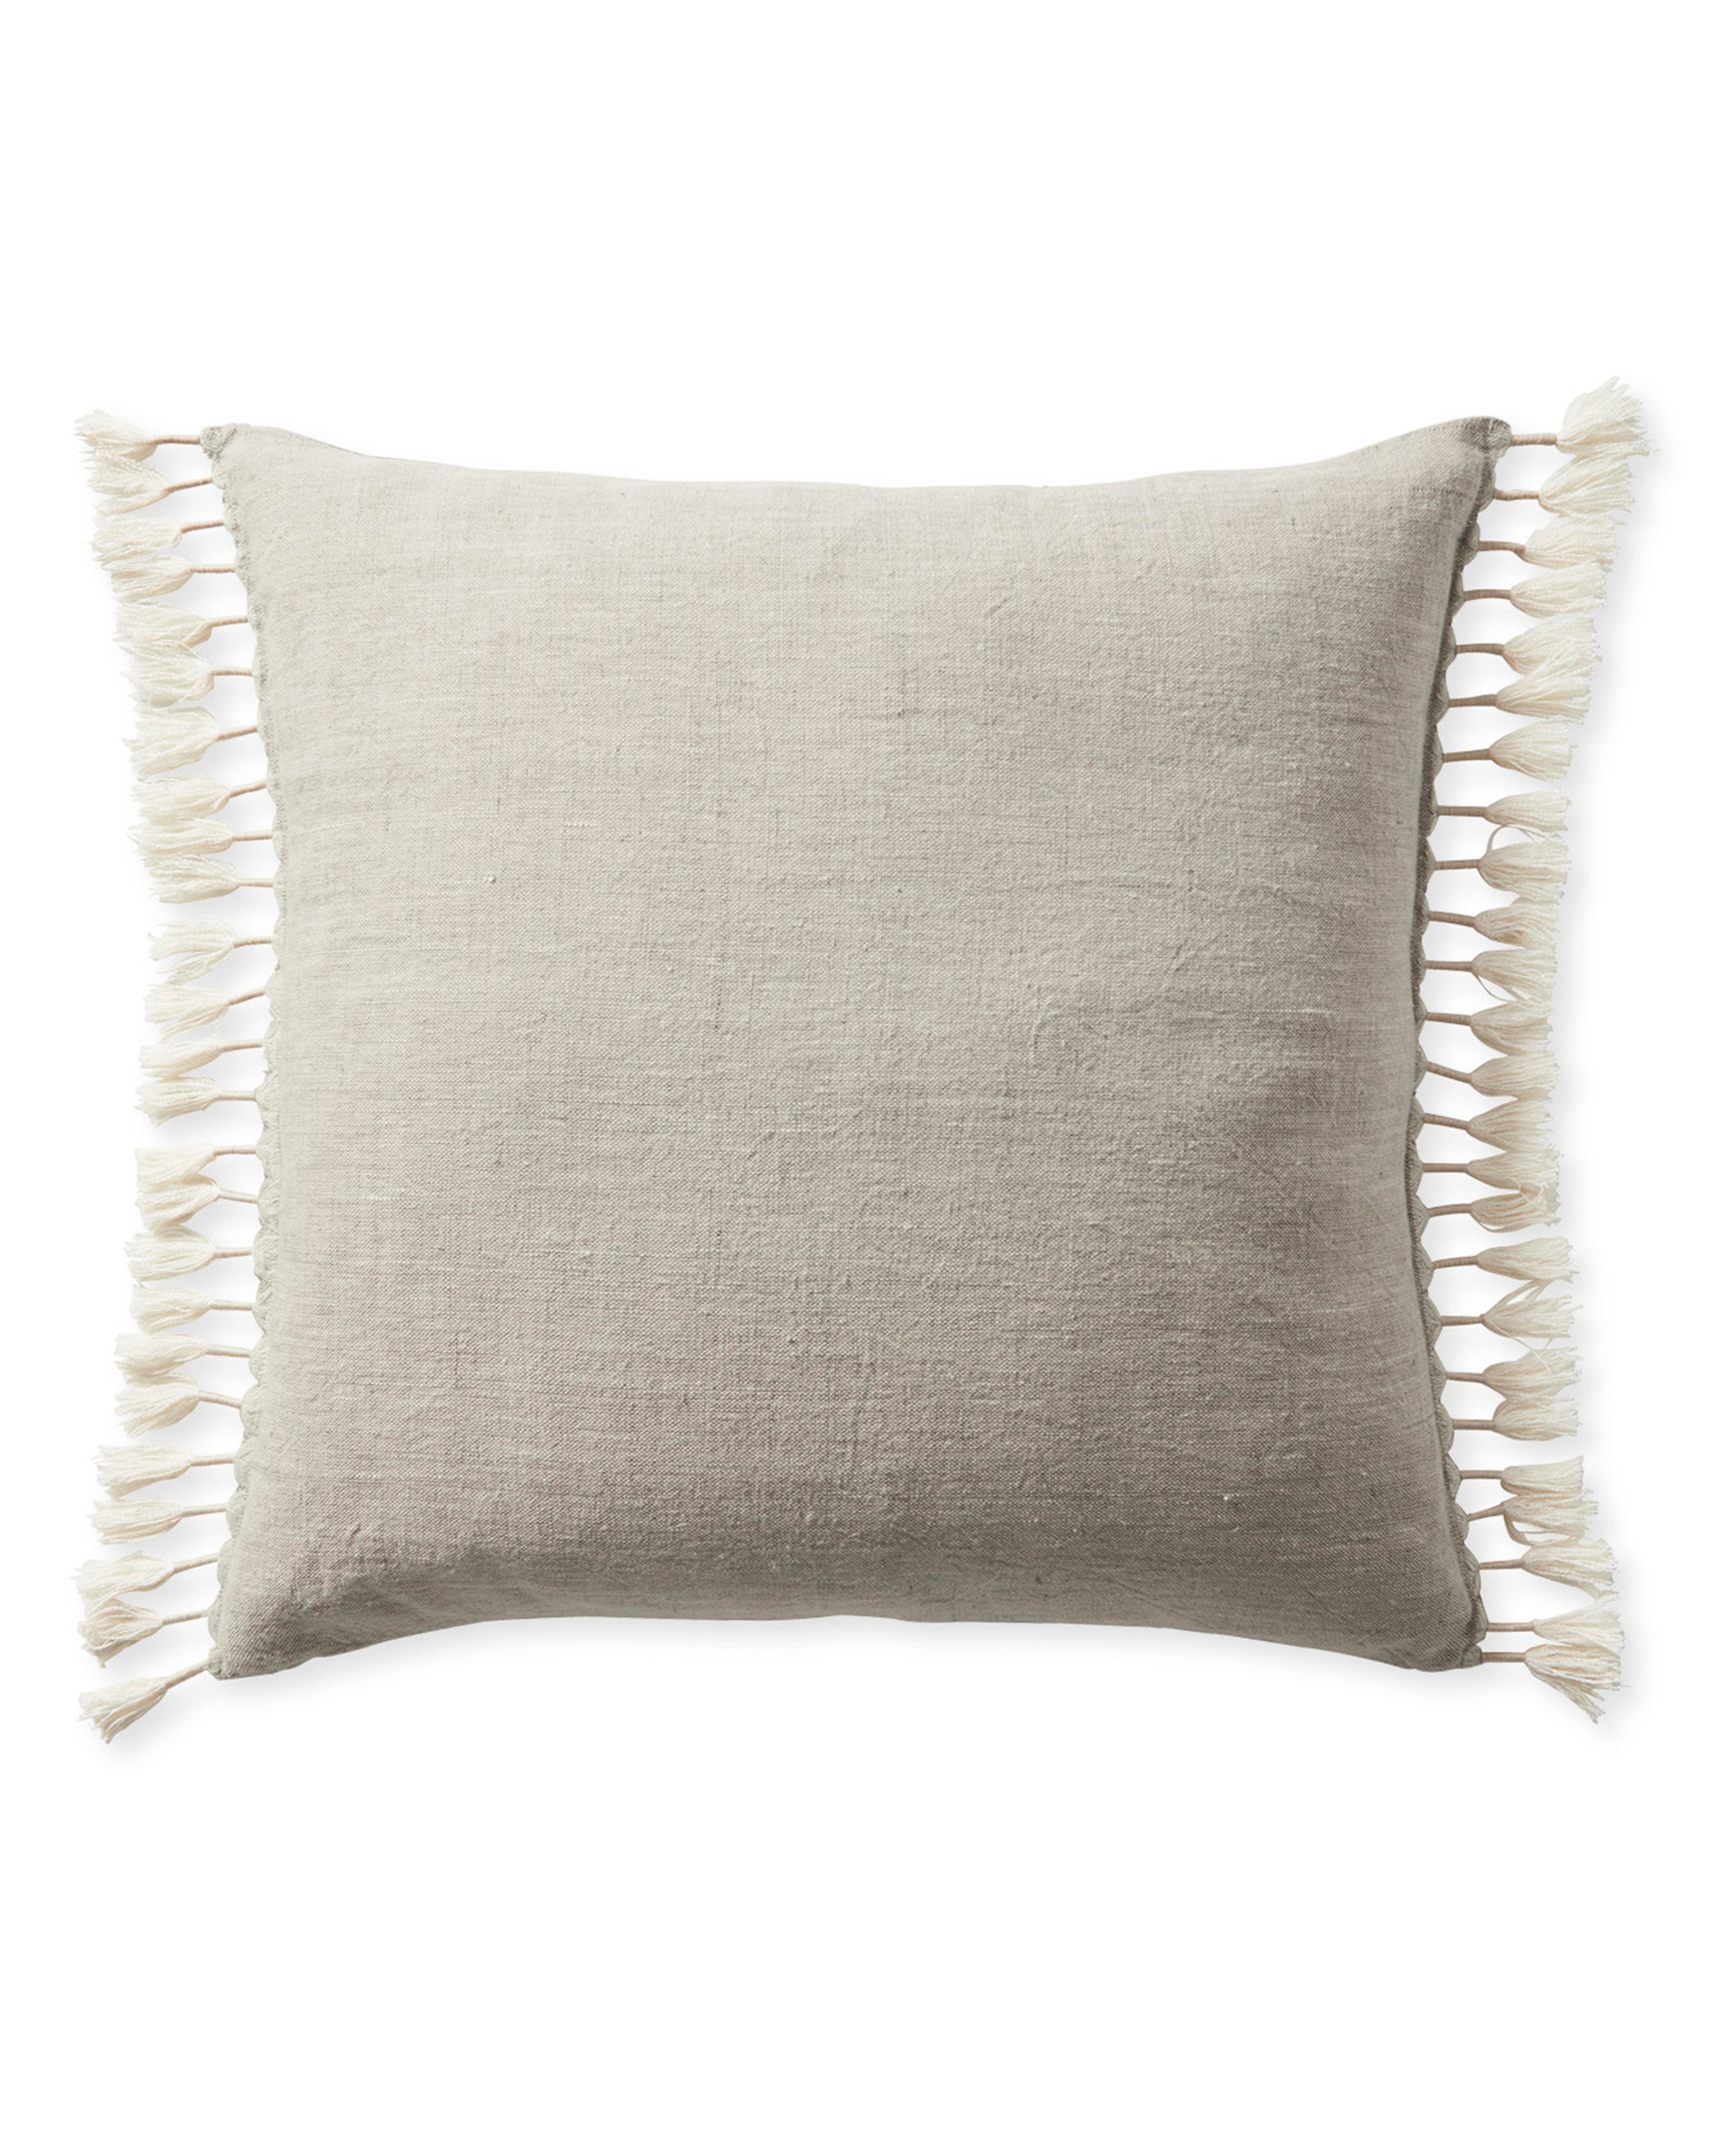 Topanga 24" SQ Pillow Cover - Ivory - Insert sold separately - Serena and Lily